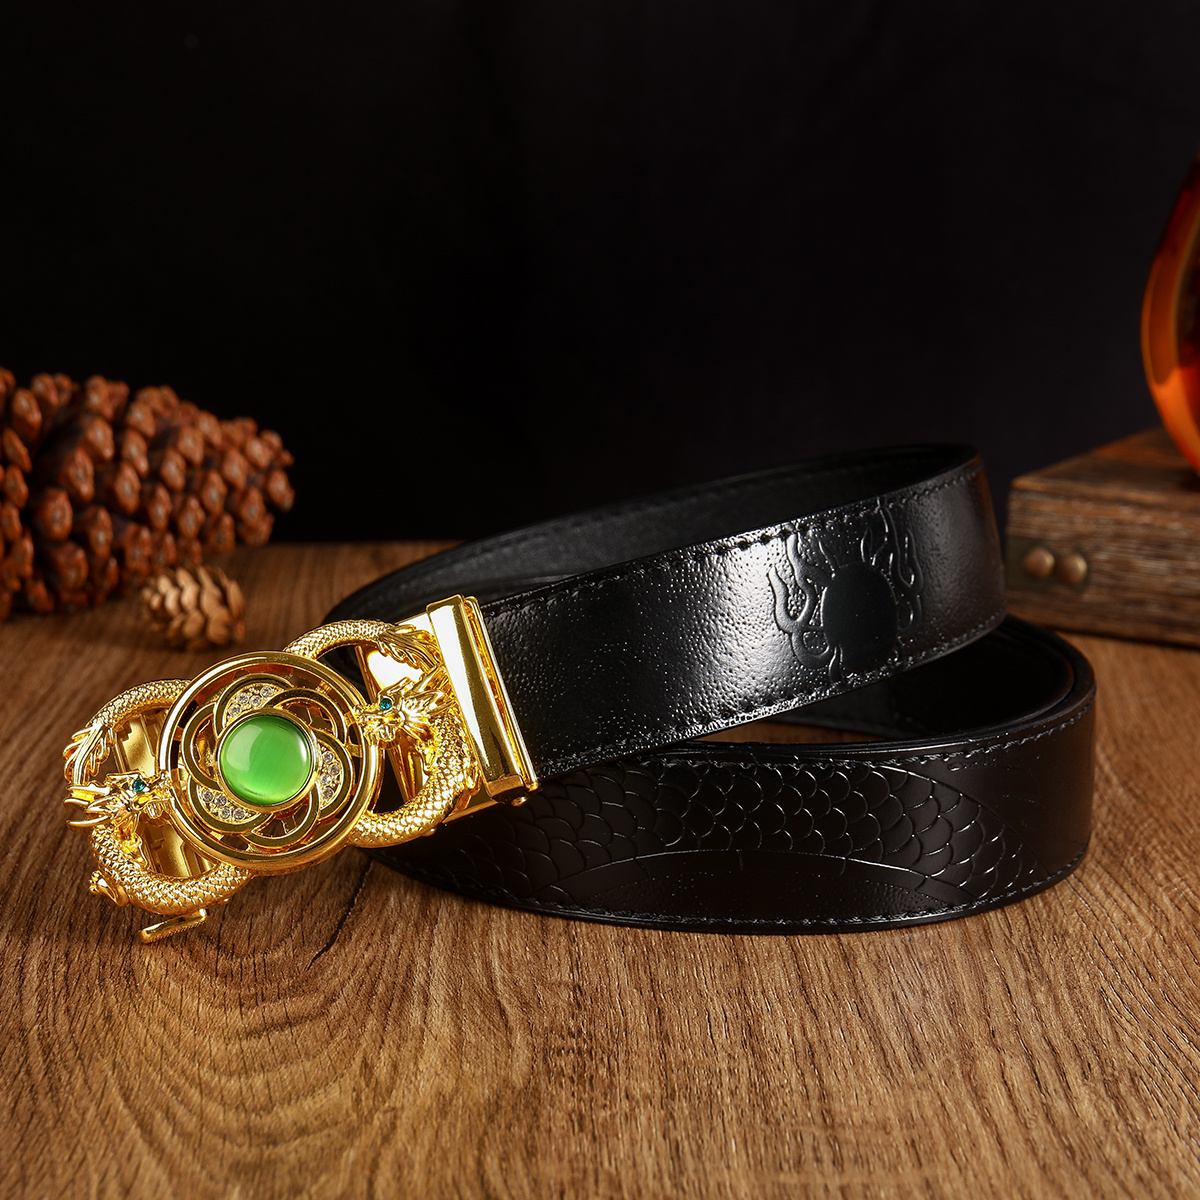 Buckle For 3.5cm Belt, Bull Head Shaped Buckle With Chinese Zodiac Design  For Men's Leather Belt, Automatic Buckle With Belt Strap Accessories